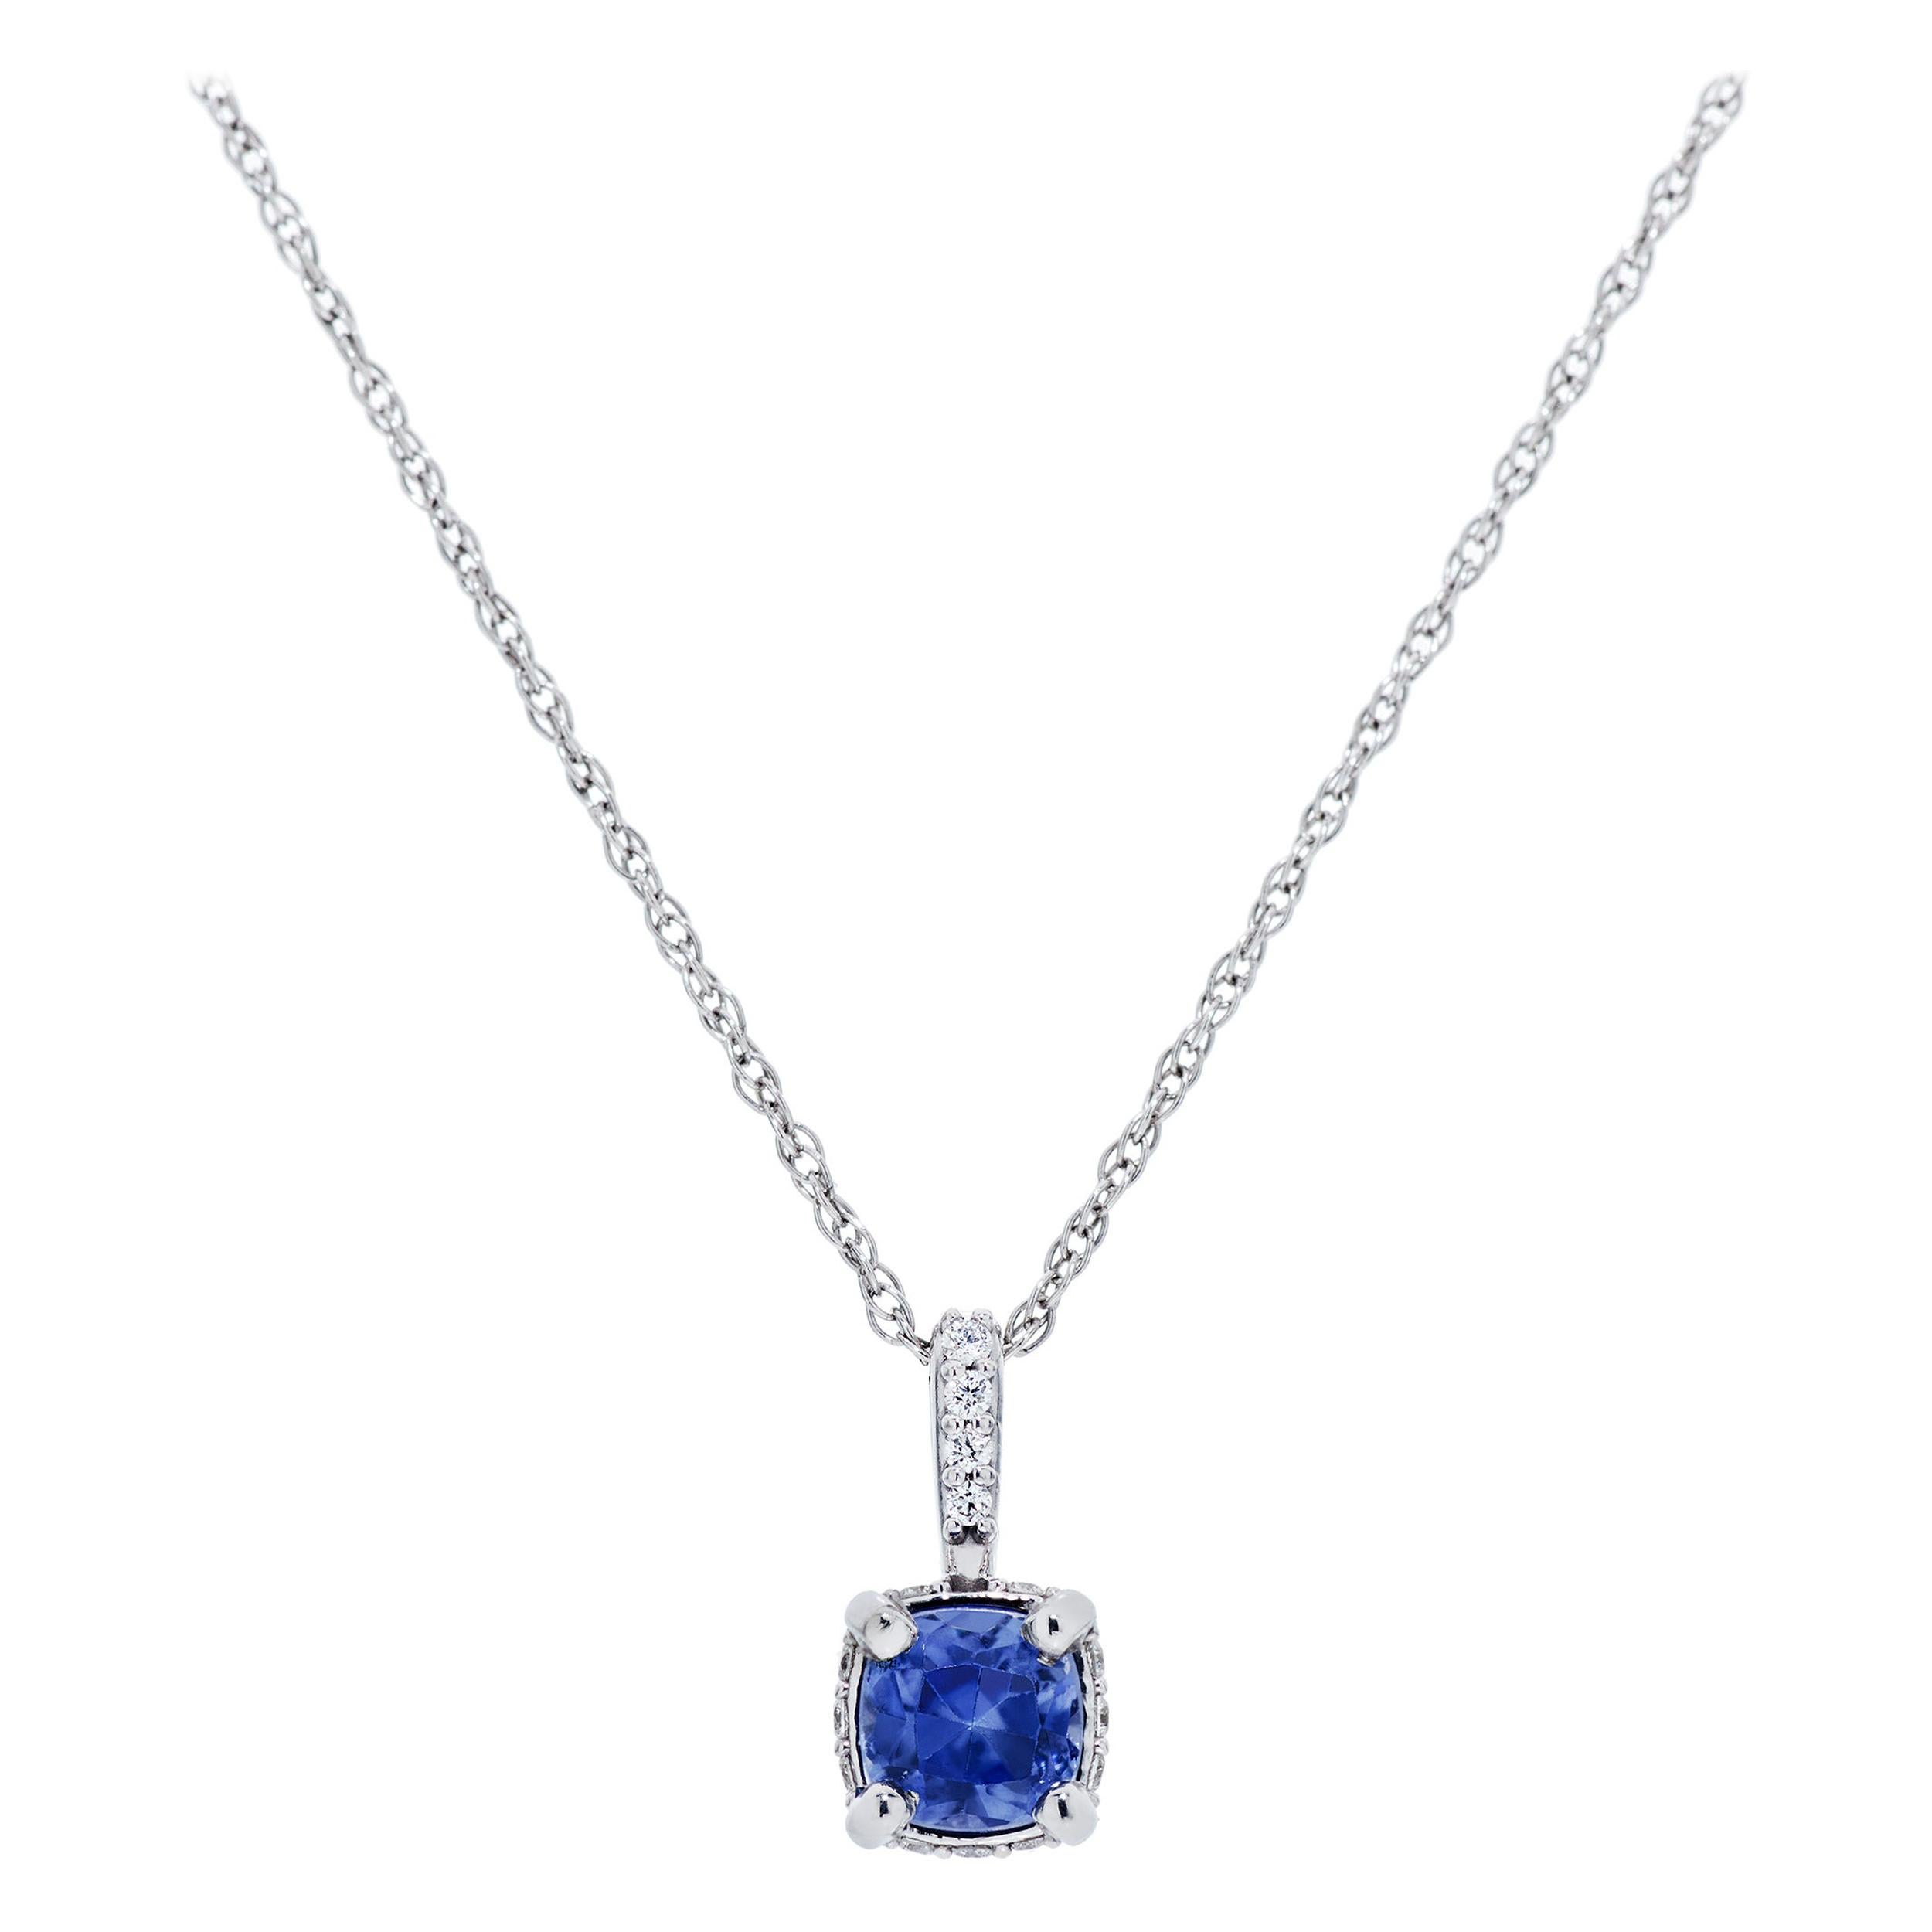 A clean and elegant matching necklace and earring set featuring a total of 2 Carats Cushion Cut Sapphires and Diamonds in the Necklace and Earring set created in 14K WG.  The pendant hangs on an 18